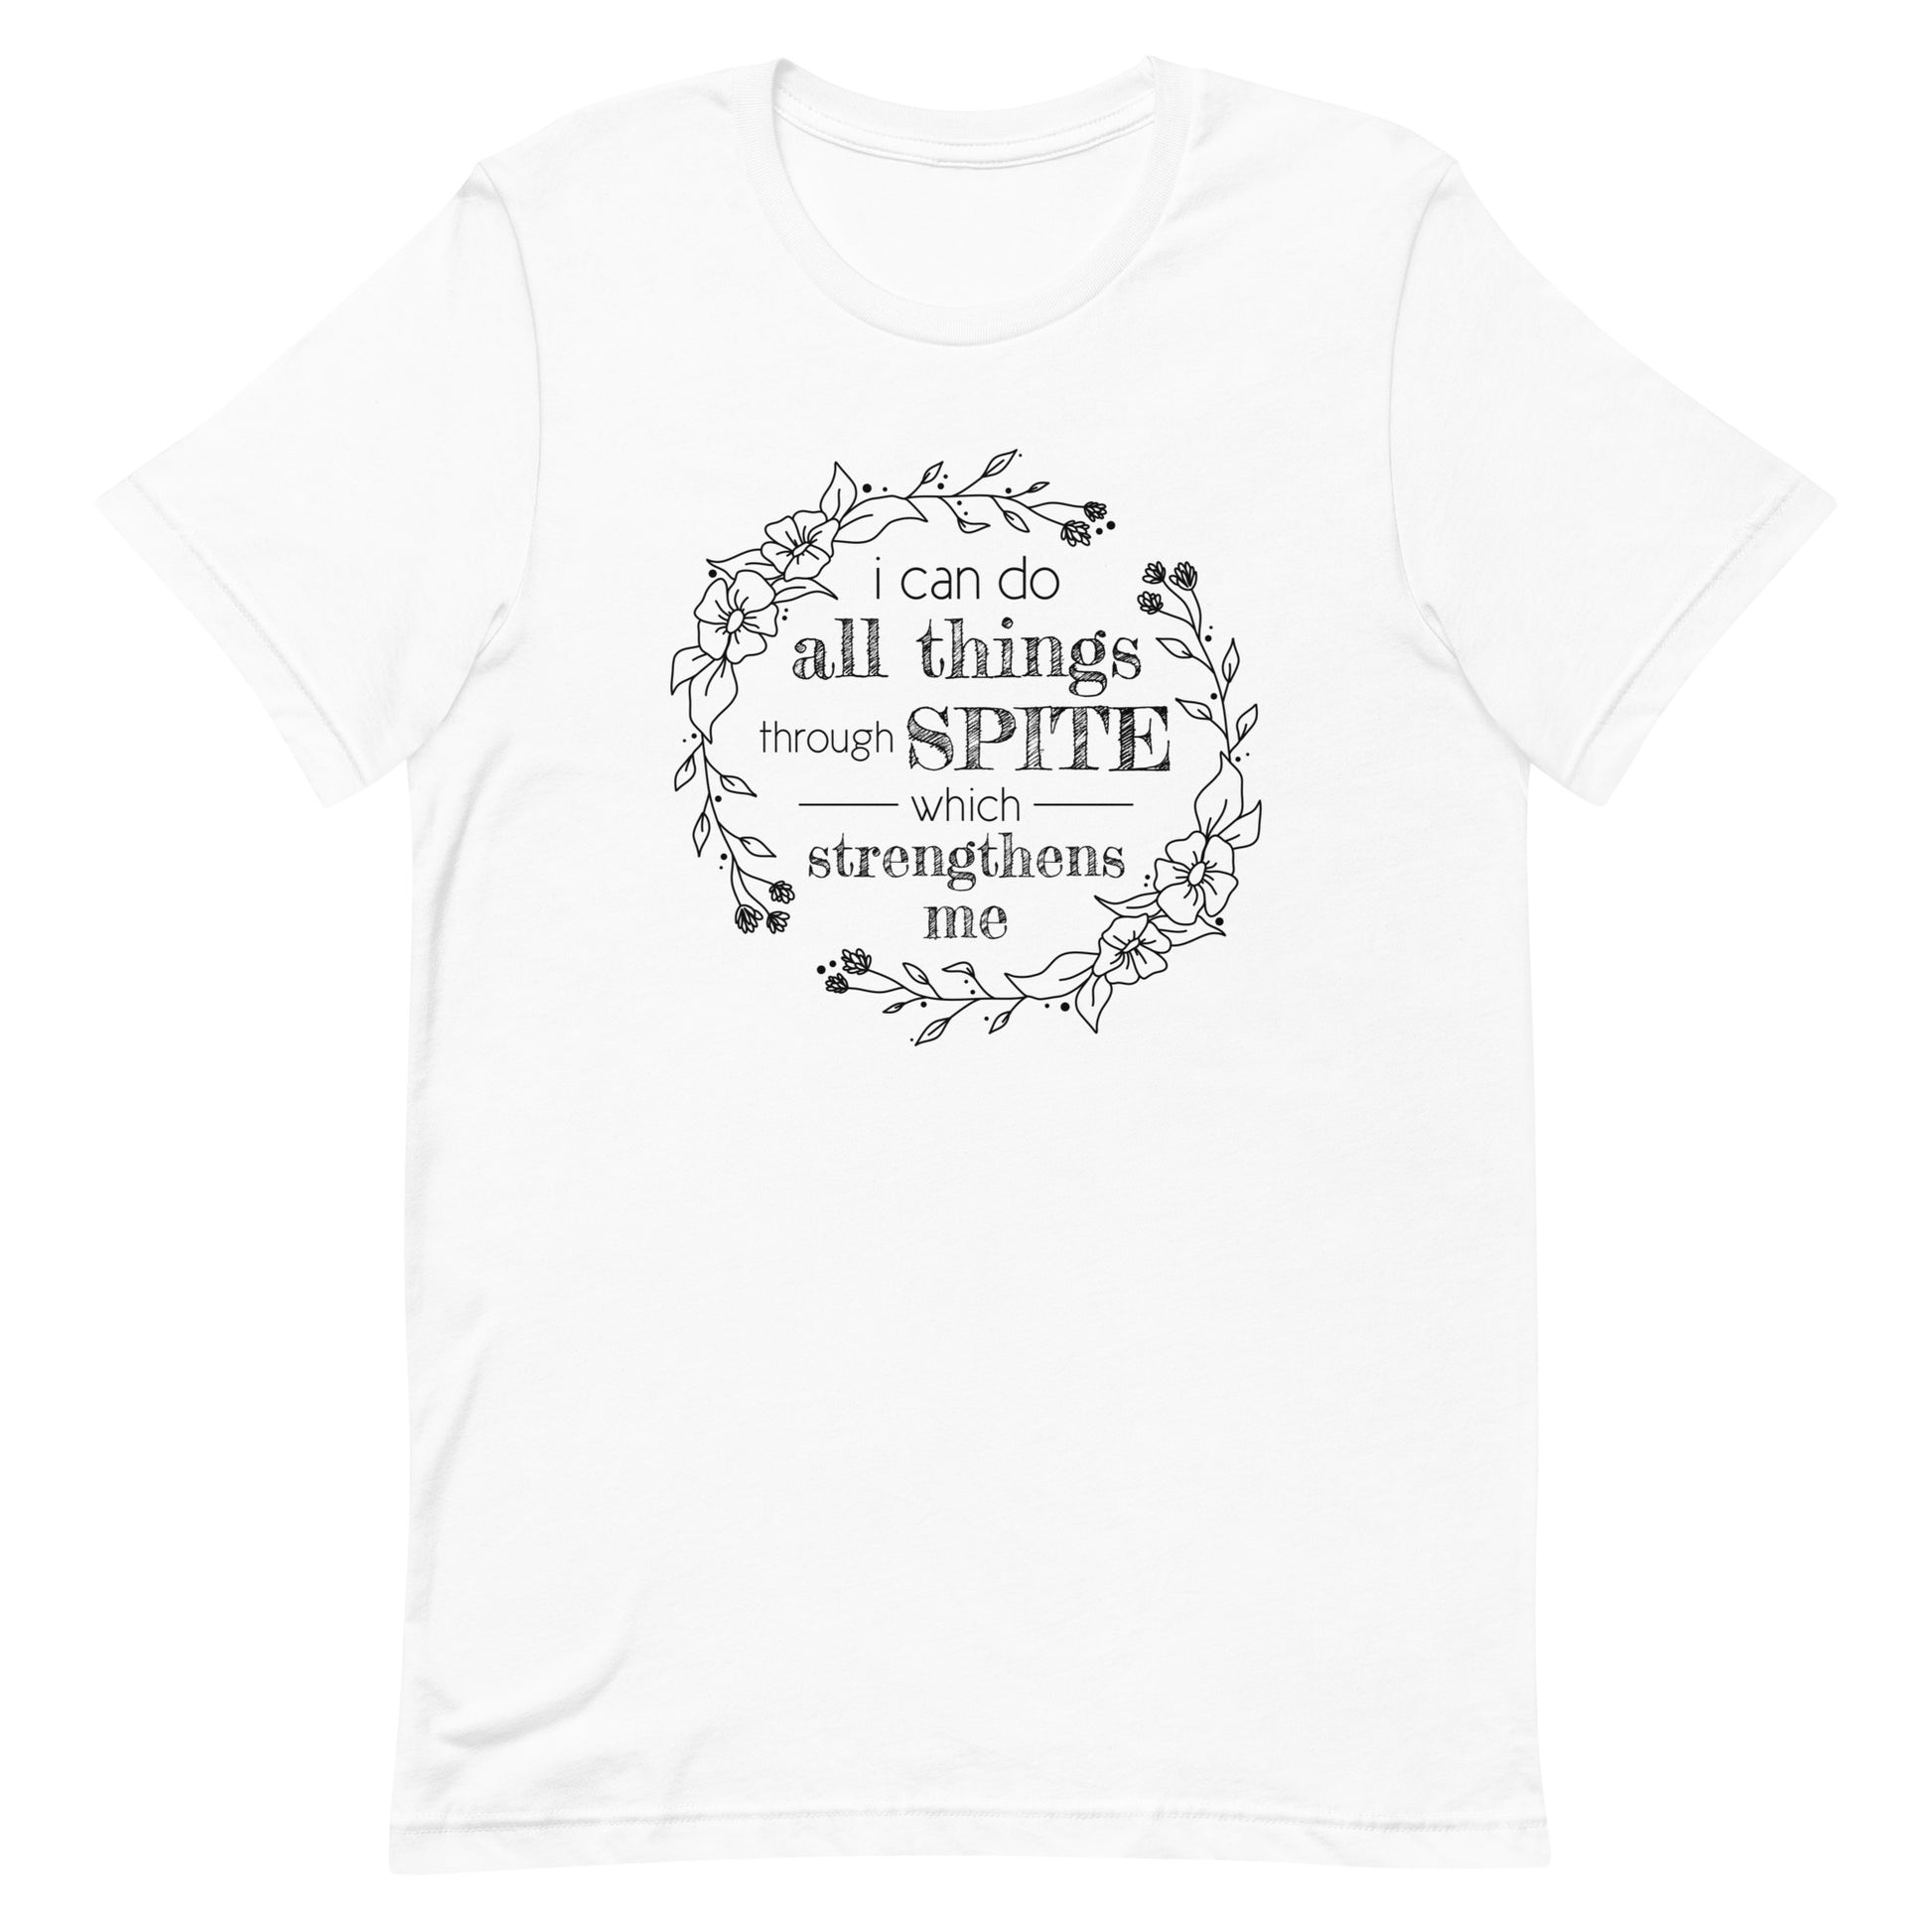 A white crewneck t-shirt with an illustration of a wreath of flowers. Inside the wreath is text that reads "I can do all things through spite which strengthens me"